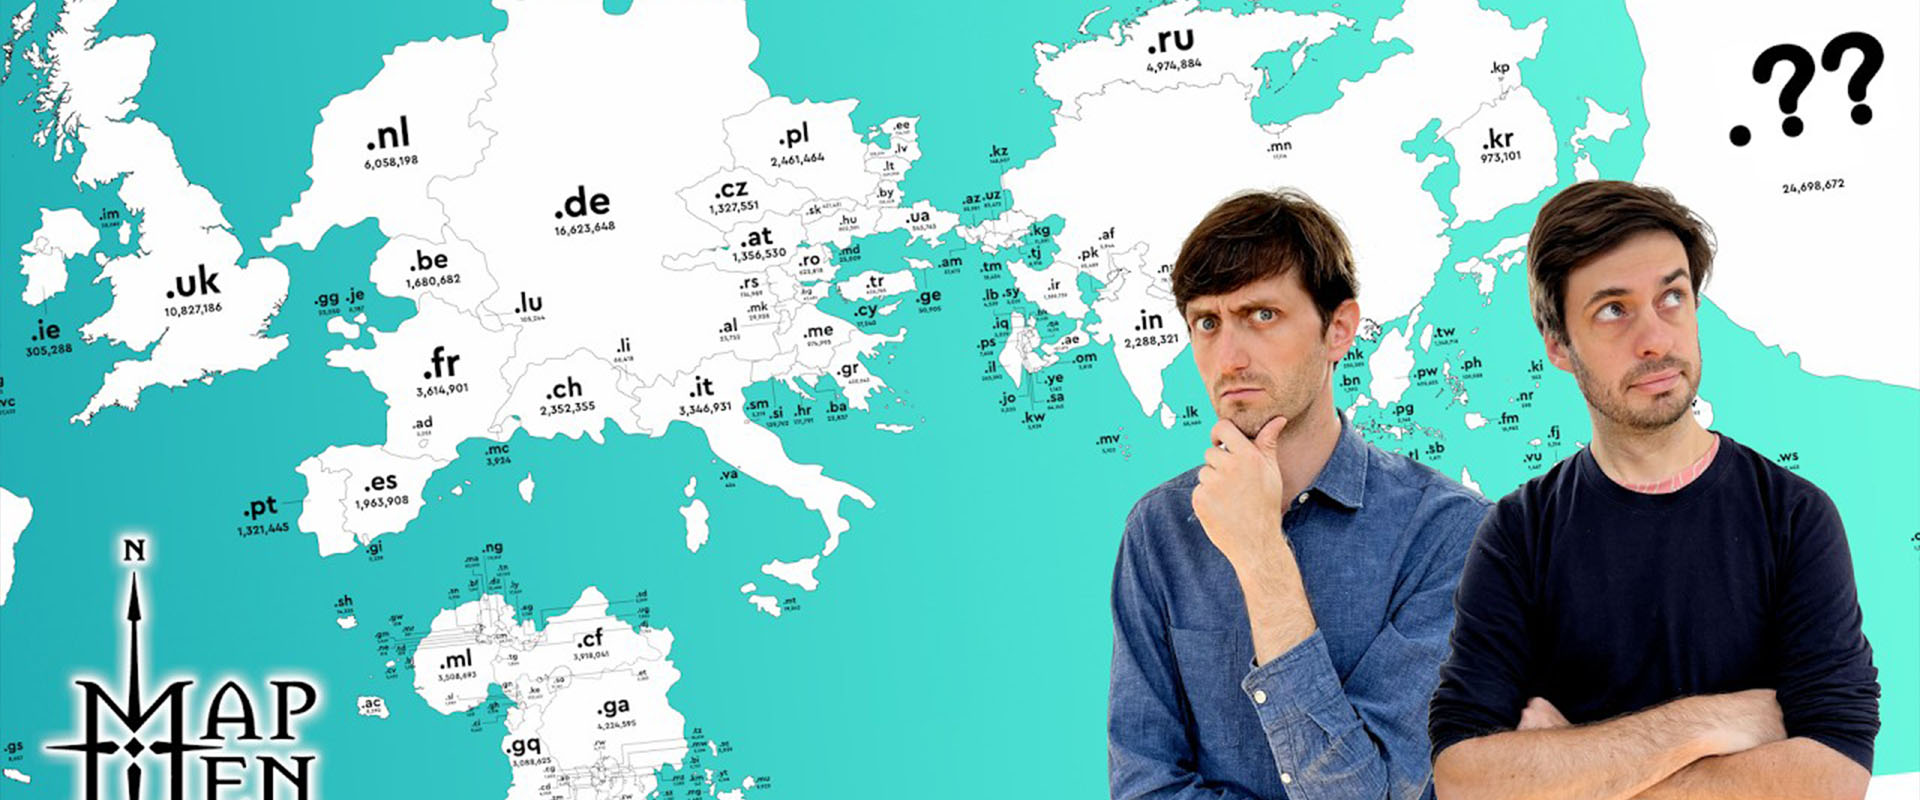 You ll never guess the most popular internet country code